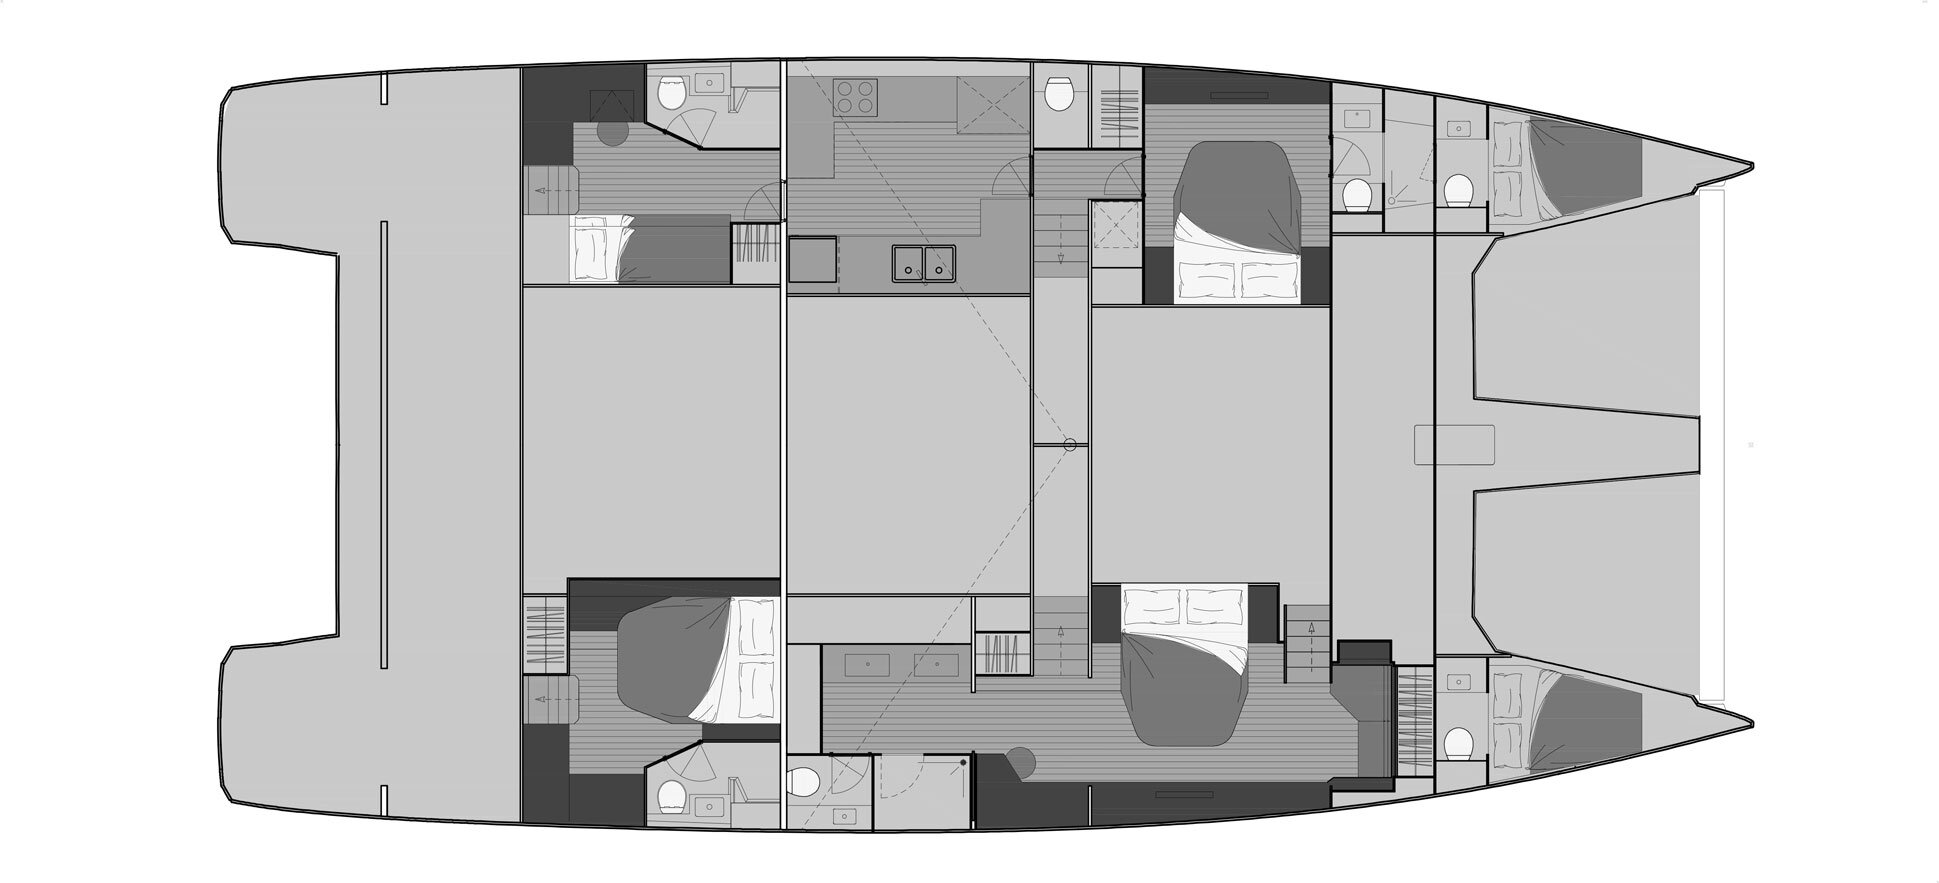 Power67_Layout_Lounge-Maestro-version---Twin-beds-portside-aft-cabin.jpg